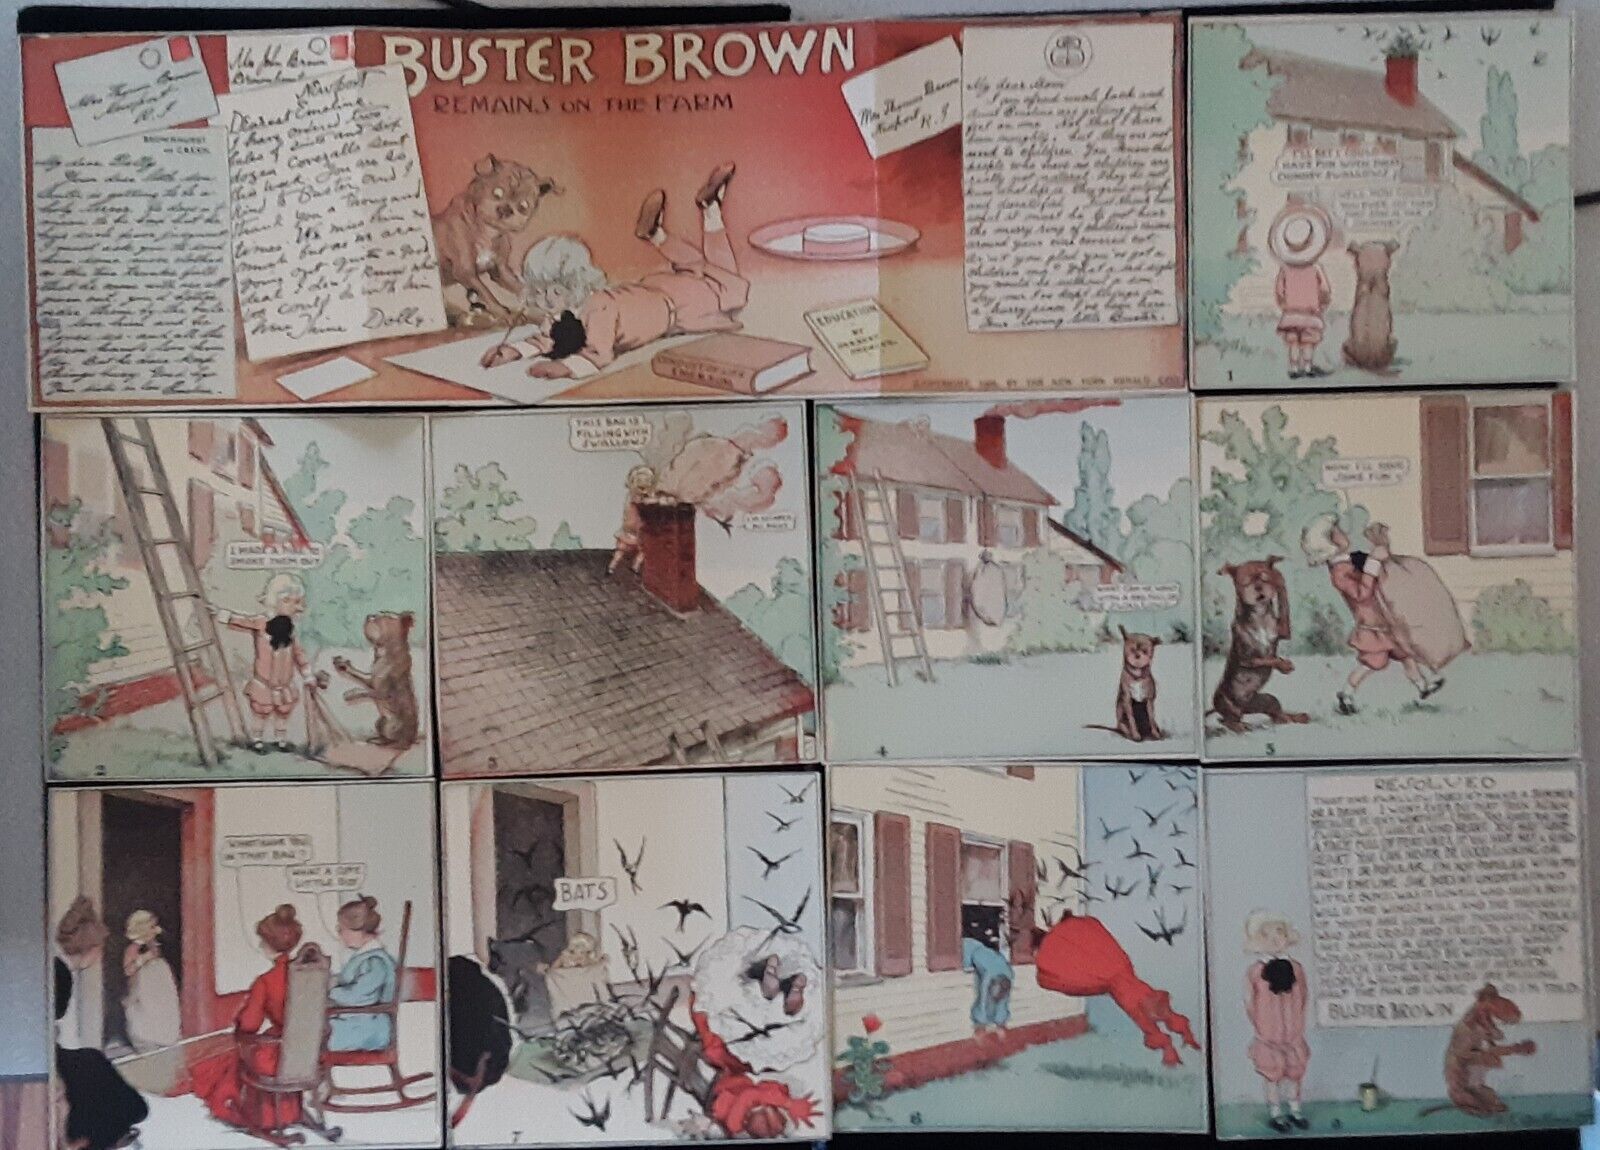 Buster Brown Farm Tige Outcault 1905 New York Herald Comic Book Plates Proofs?